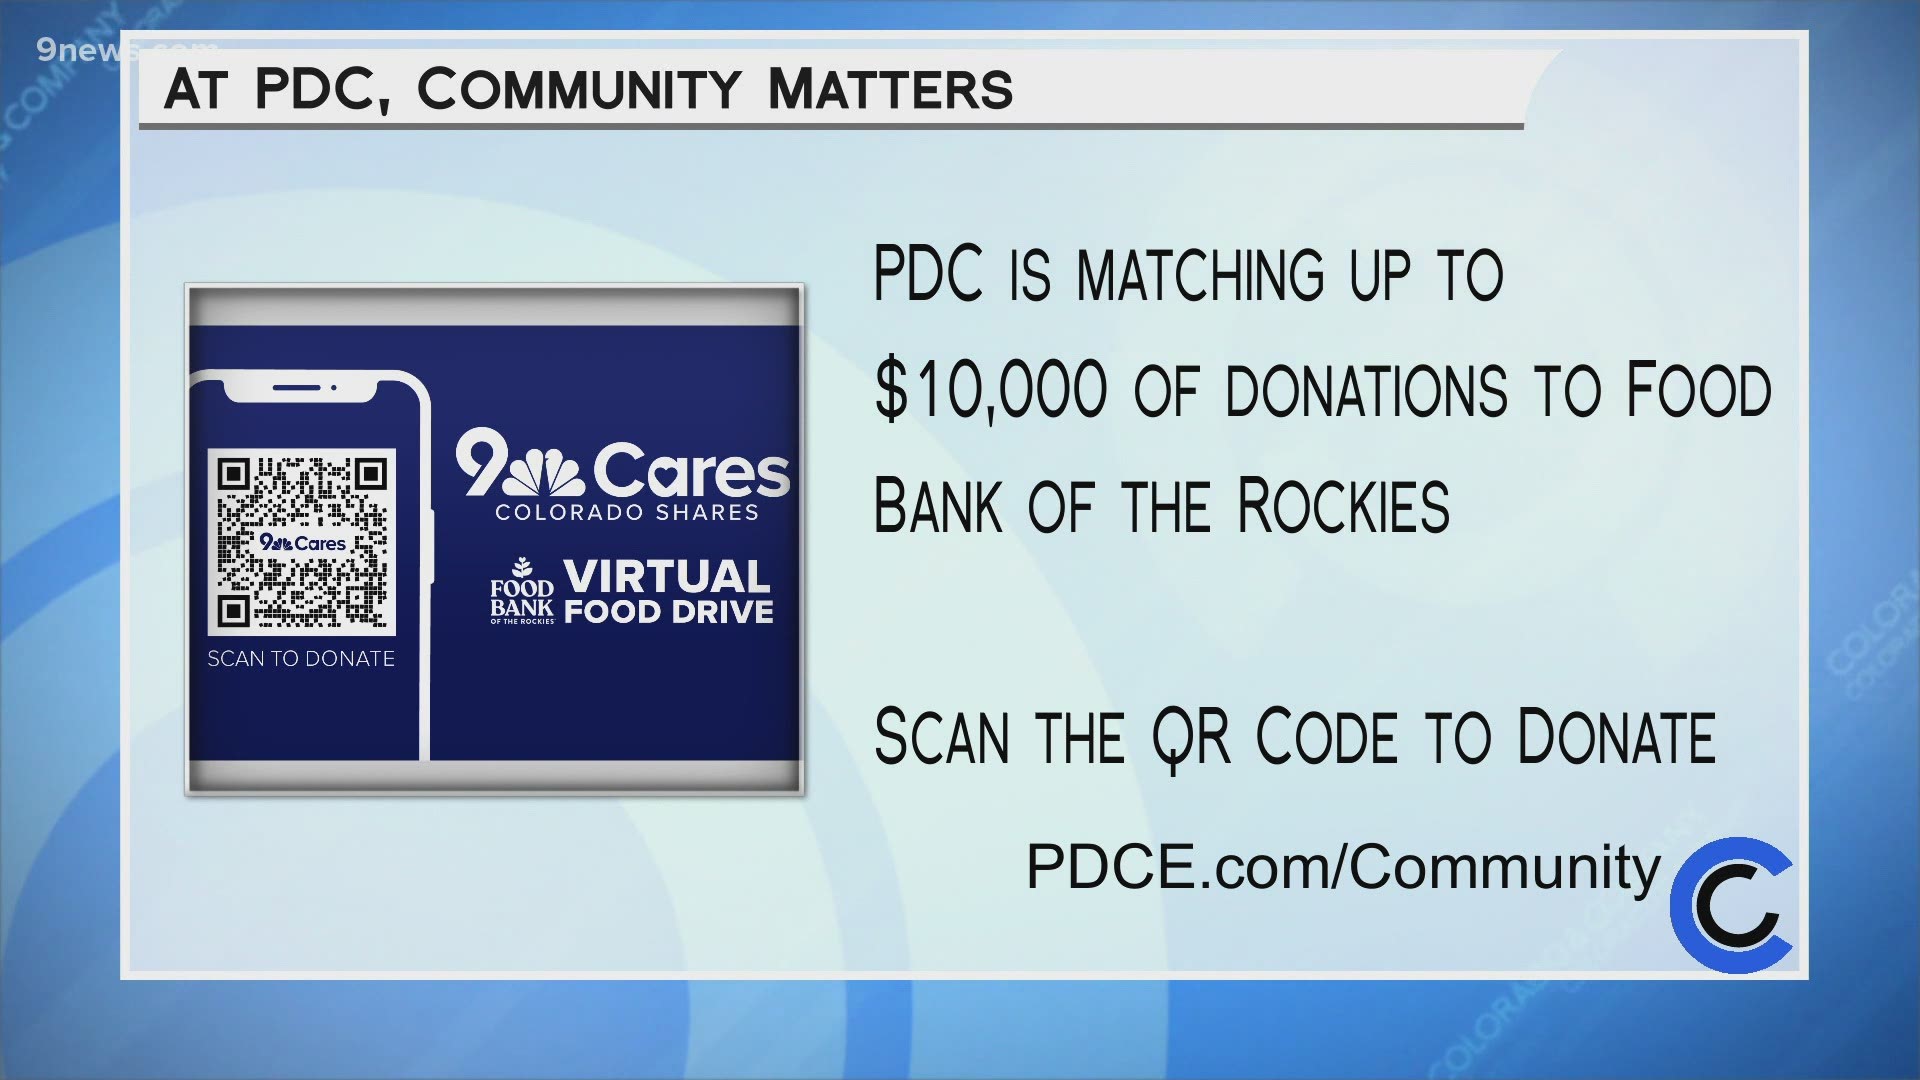 Make a donation now to Food Bank of the Rockies and PDC Energy will match up to $10,000! Learn more at PDCEnergy.com/Community.